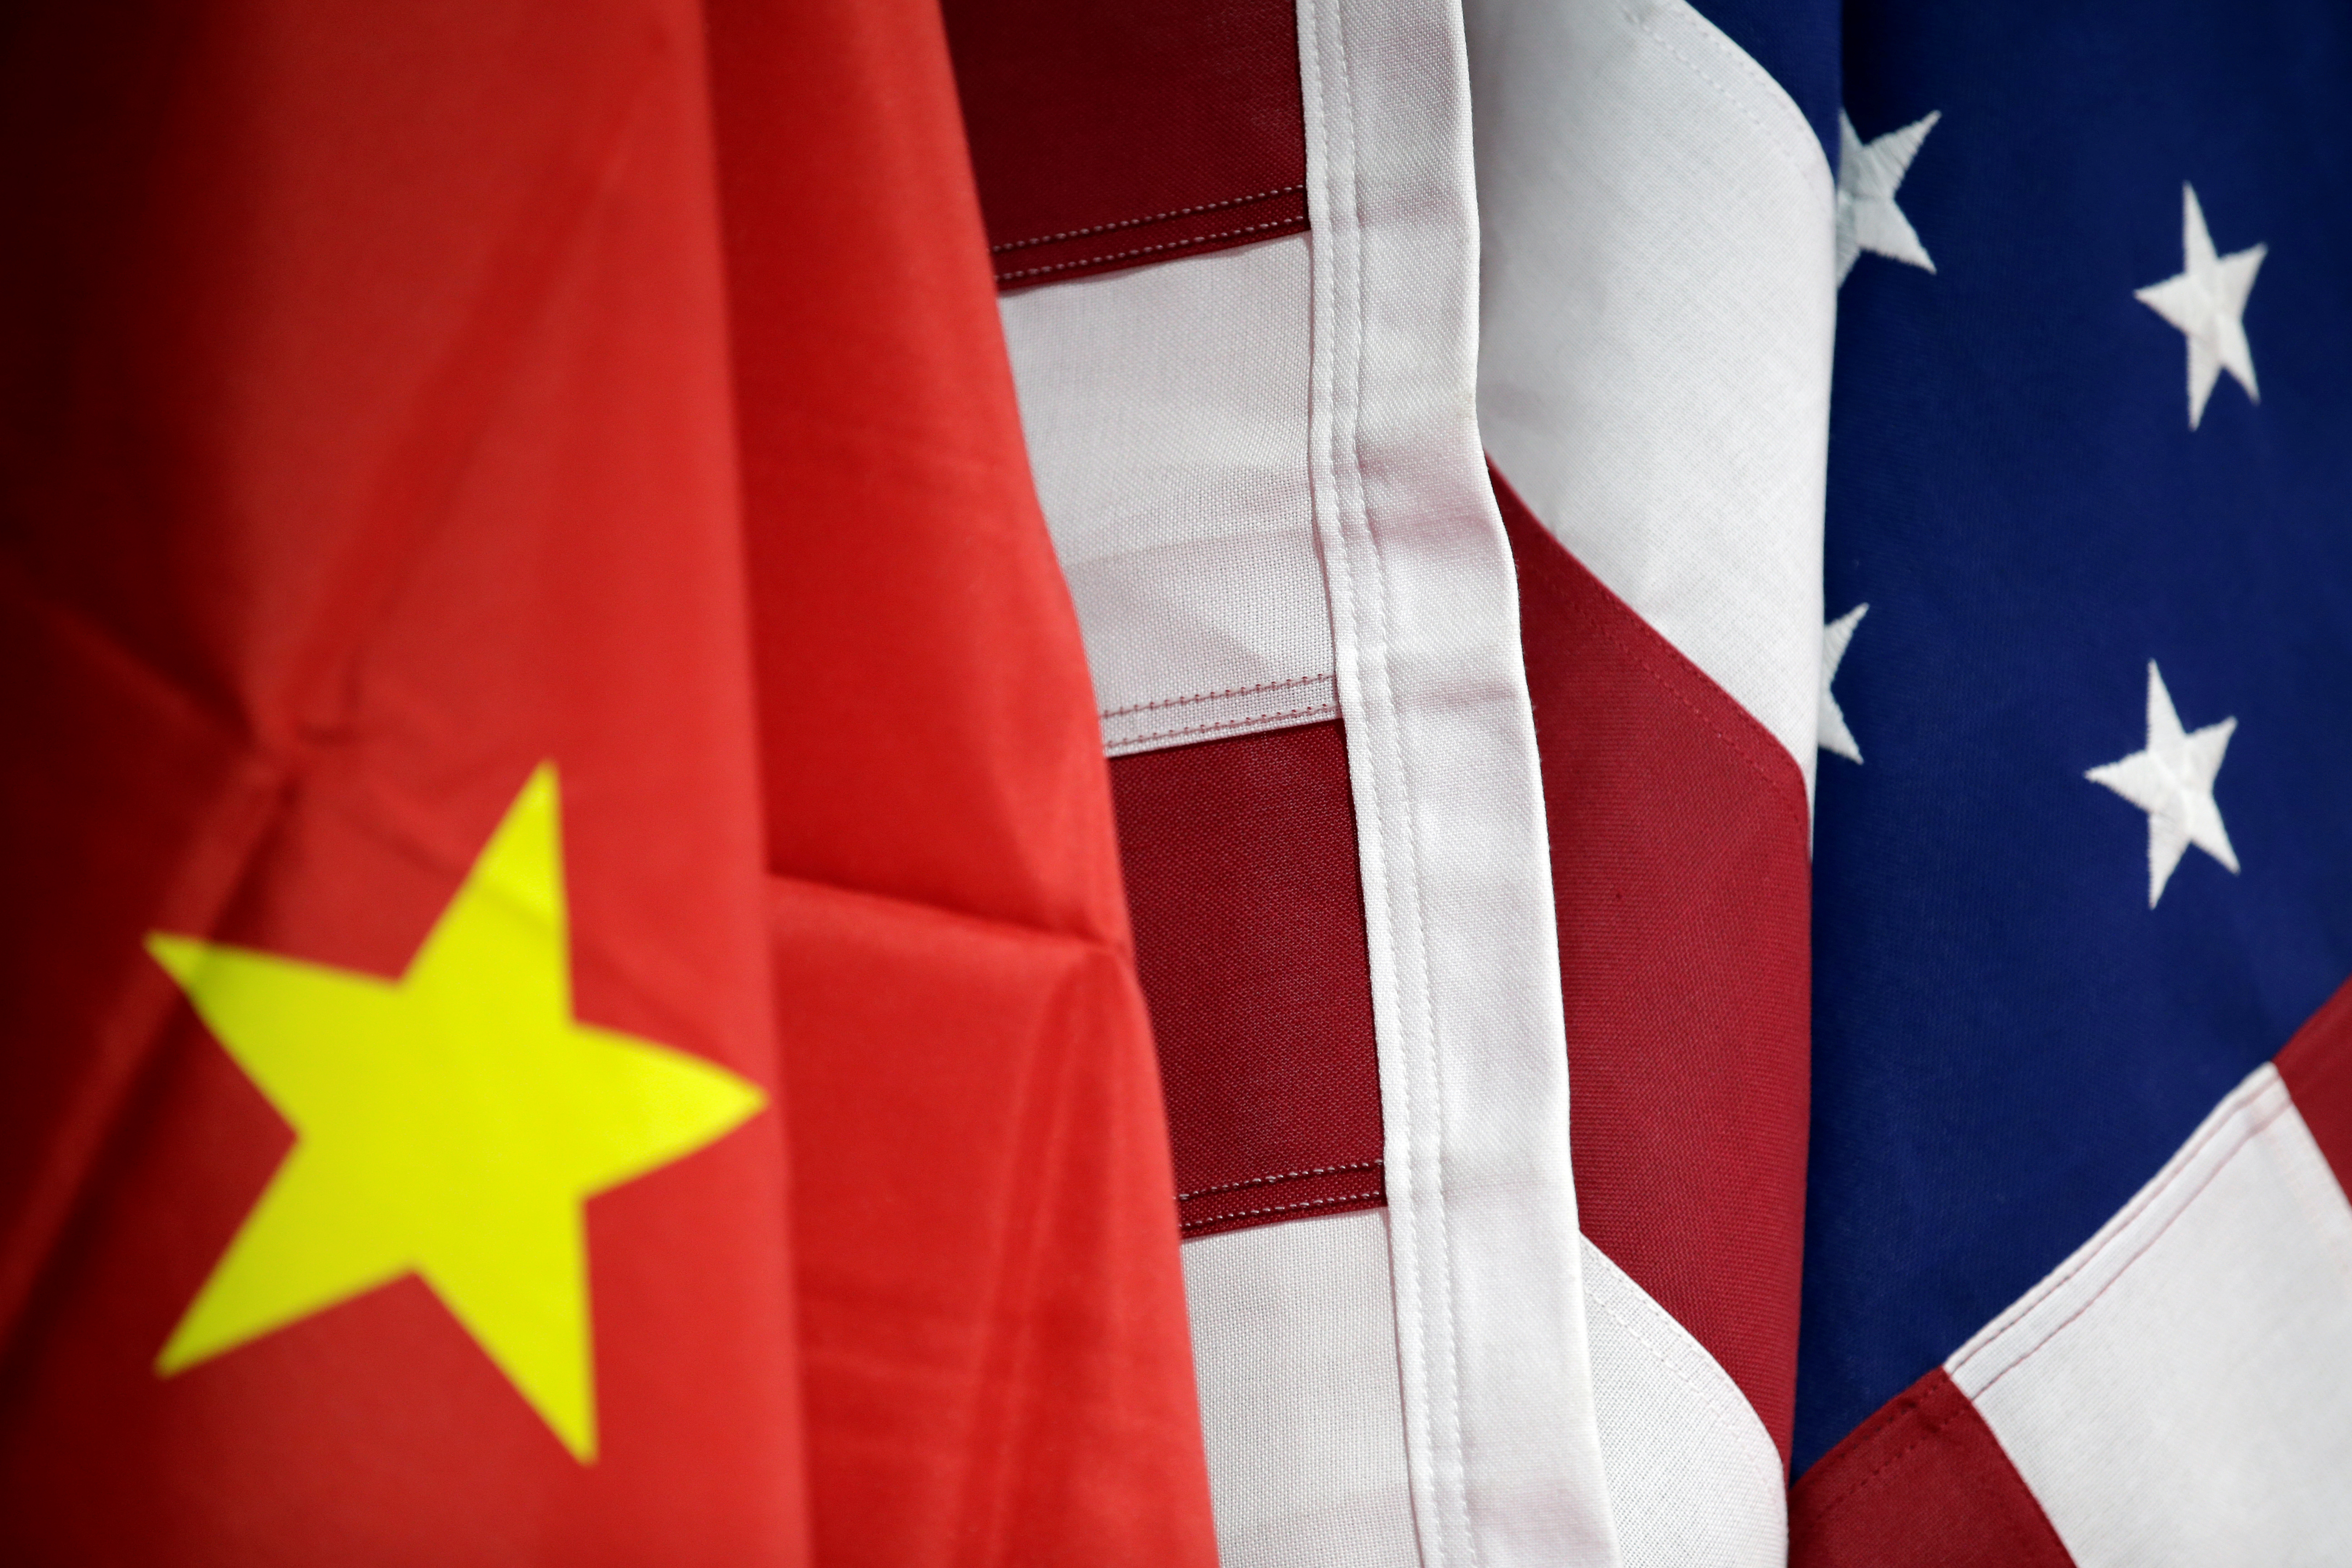 Flags of U.S. and China are displayed at American International Chamber of Commerce (AICC)'s booth during China International Fair for Trade in Services in Beijing, China, May 28, 2019.